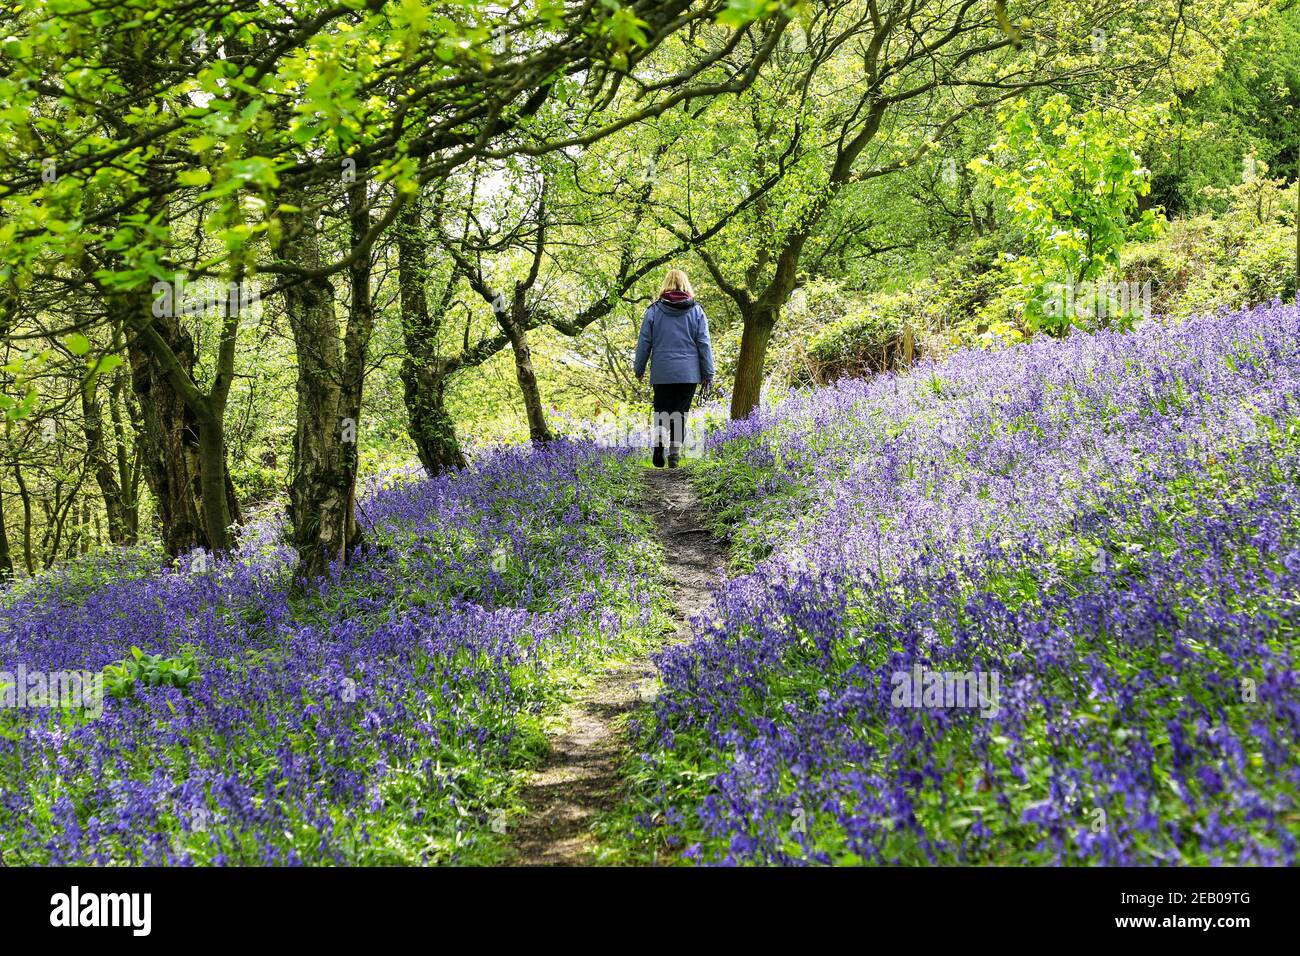 A woman walking on a path through an English Bluebell wood in spring time with the leaves on the trees just coming out, Staffordshire, England, UK Stock Photo